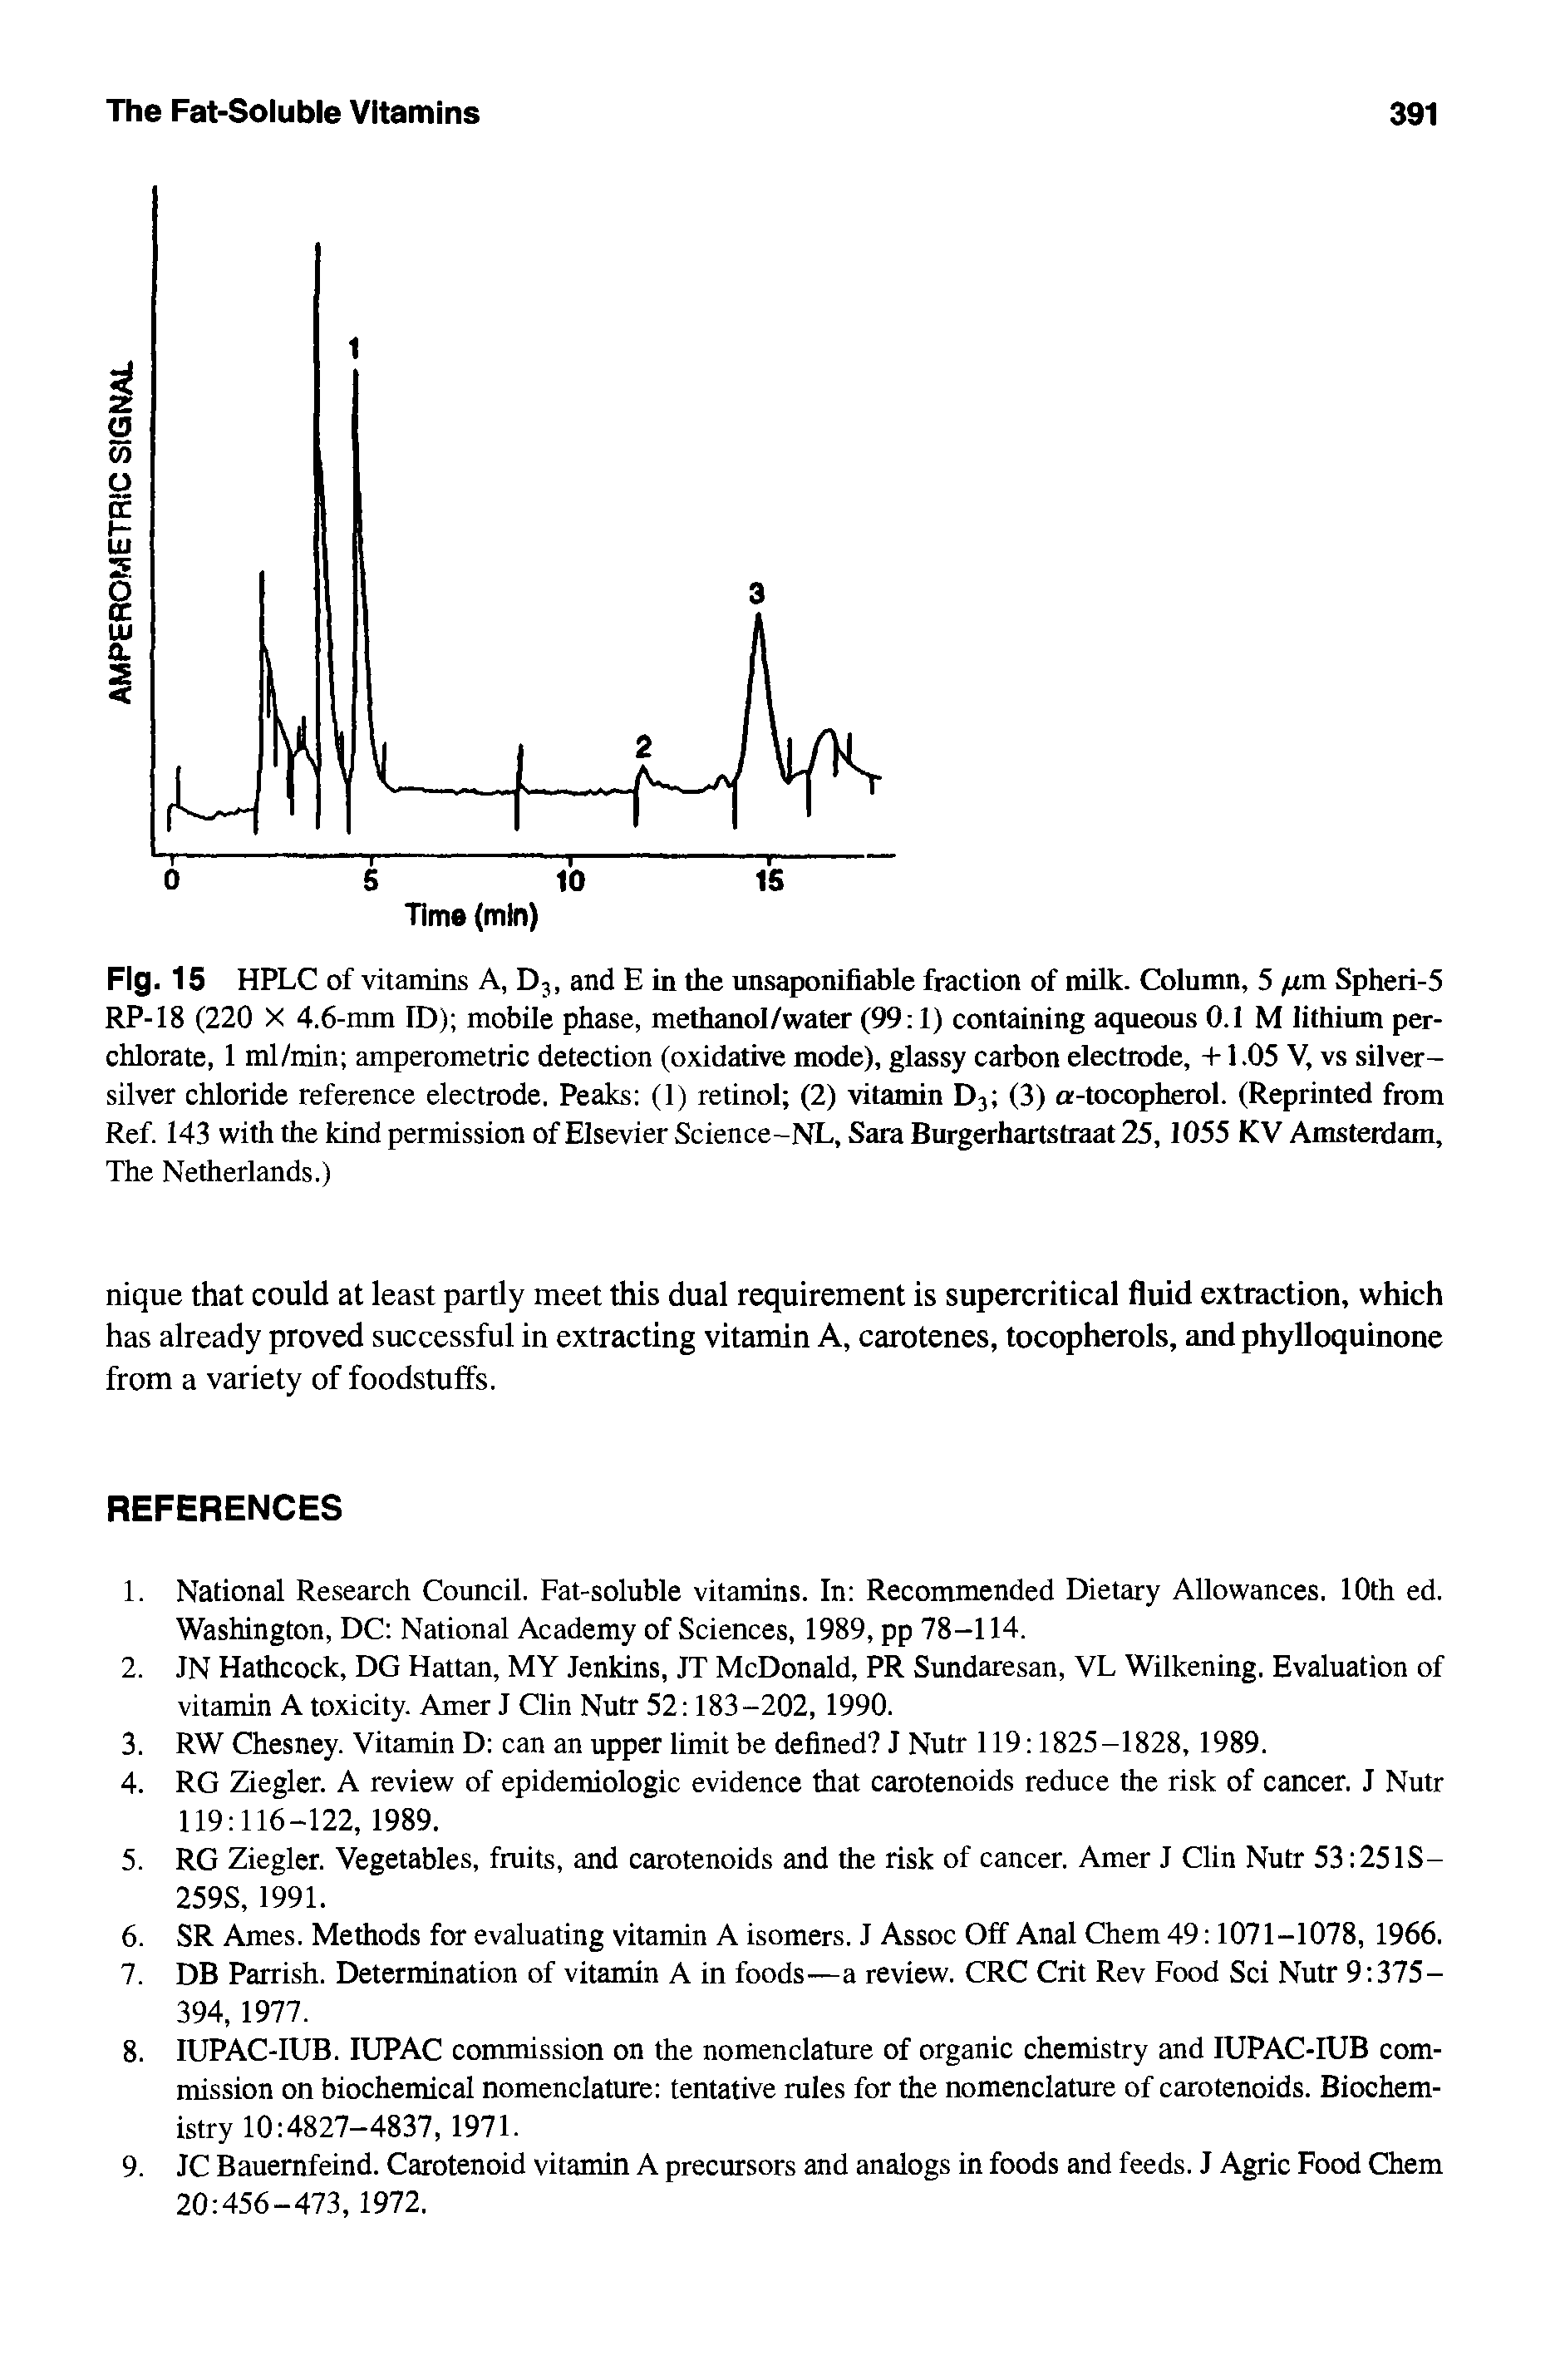 Fig. 15 HPLC of vitamins A, D3, and E in the unsaponifiable fraction of milk. Column, 5 /nm Spheri-5 RP-18 (220 X 4.6-mm ID) mobile phase, methanol/water (99 1) containing aqueous 0.1 M lithium perchlorate, 1 ml/min amperometric detection (oxidative mode), glassy carbon electrode, +1.05 V, vs silver-silver chloride reference electrode. Peaks (1) retinol (2) vitamin D3 (3) a-tocopherol. (Reprinted from Ref. 143 with the kind permission of Elsevier Science-NL, Sara Burgerhartstraat 25,1055 KV Amsterdam, The Netherlands.)...